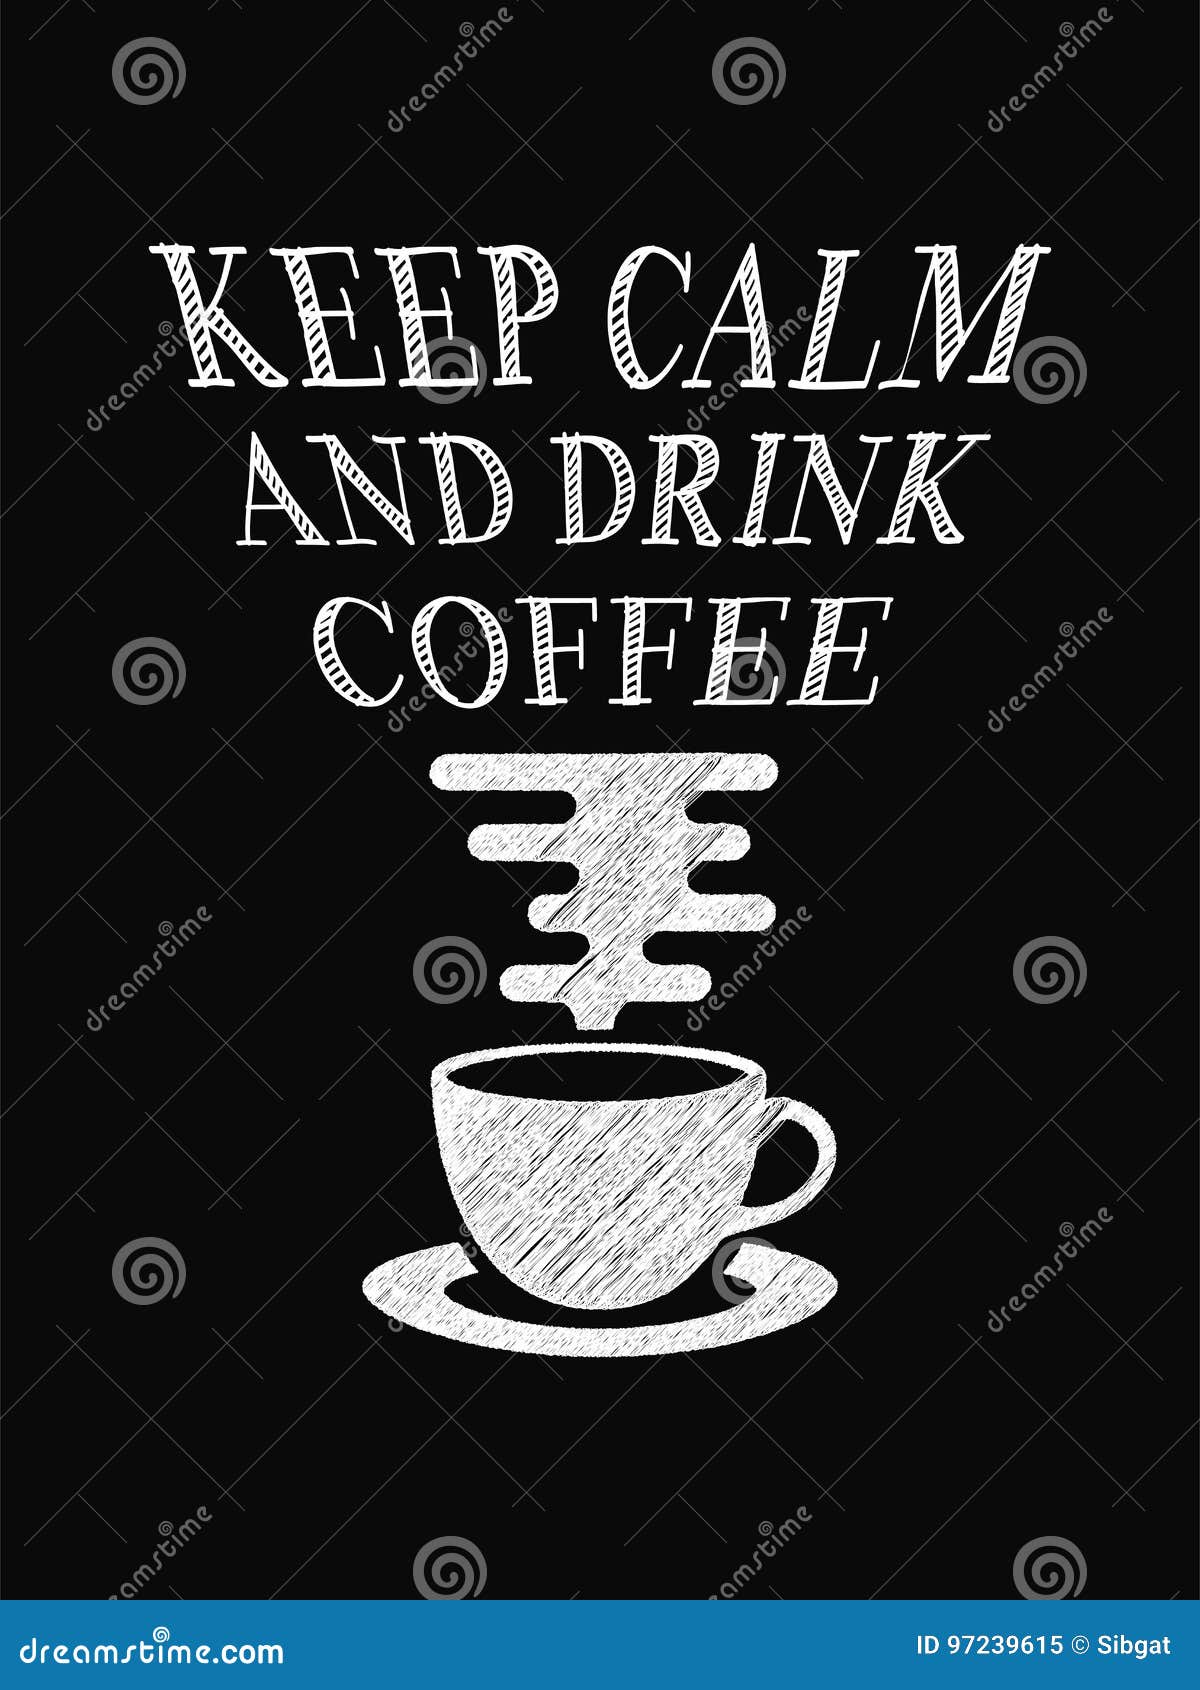 Quote Coffee Poster Keep Calm And Drink Coffee Stock Vector Illustration Of Calligraphy 